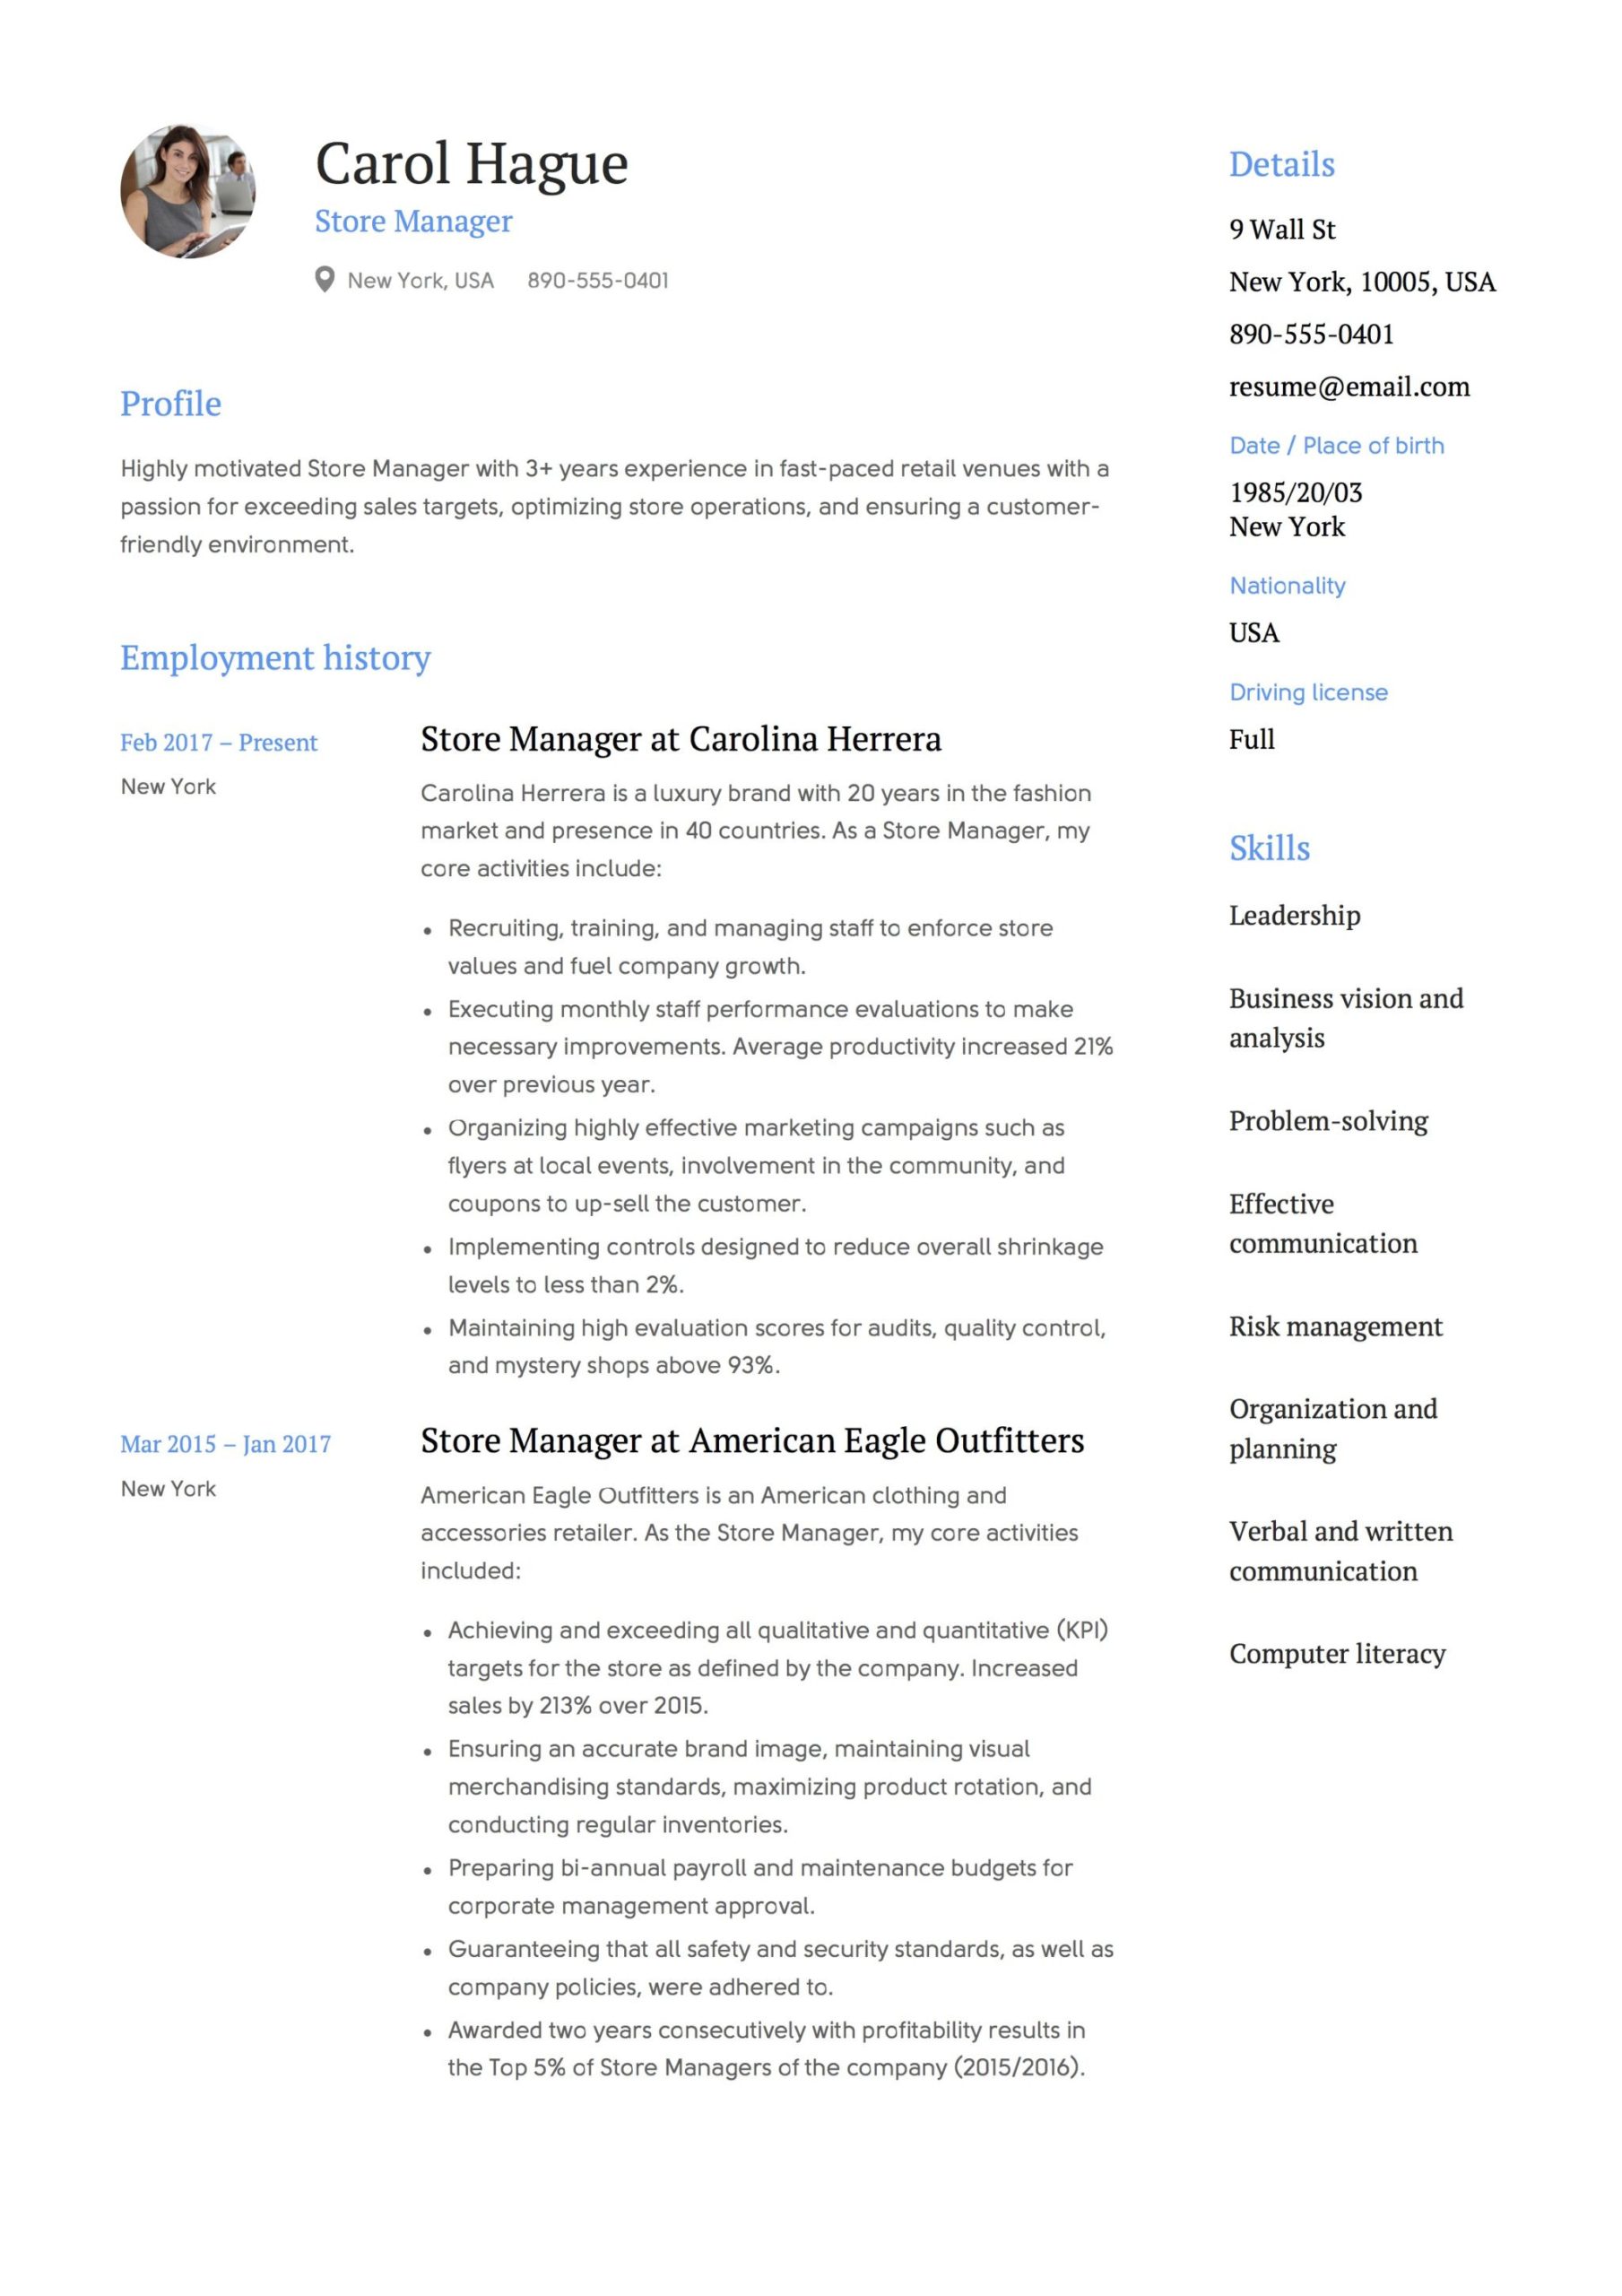 Professional Summary Resume Sample for Retail Retail Resume Examples 2022 Free Downloads Pdfs